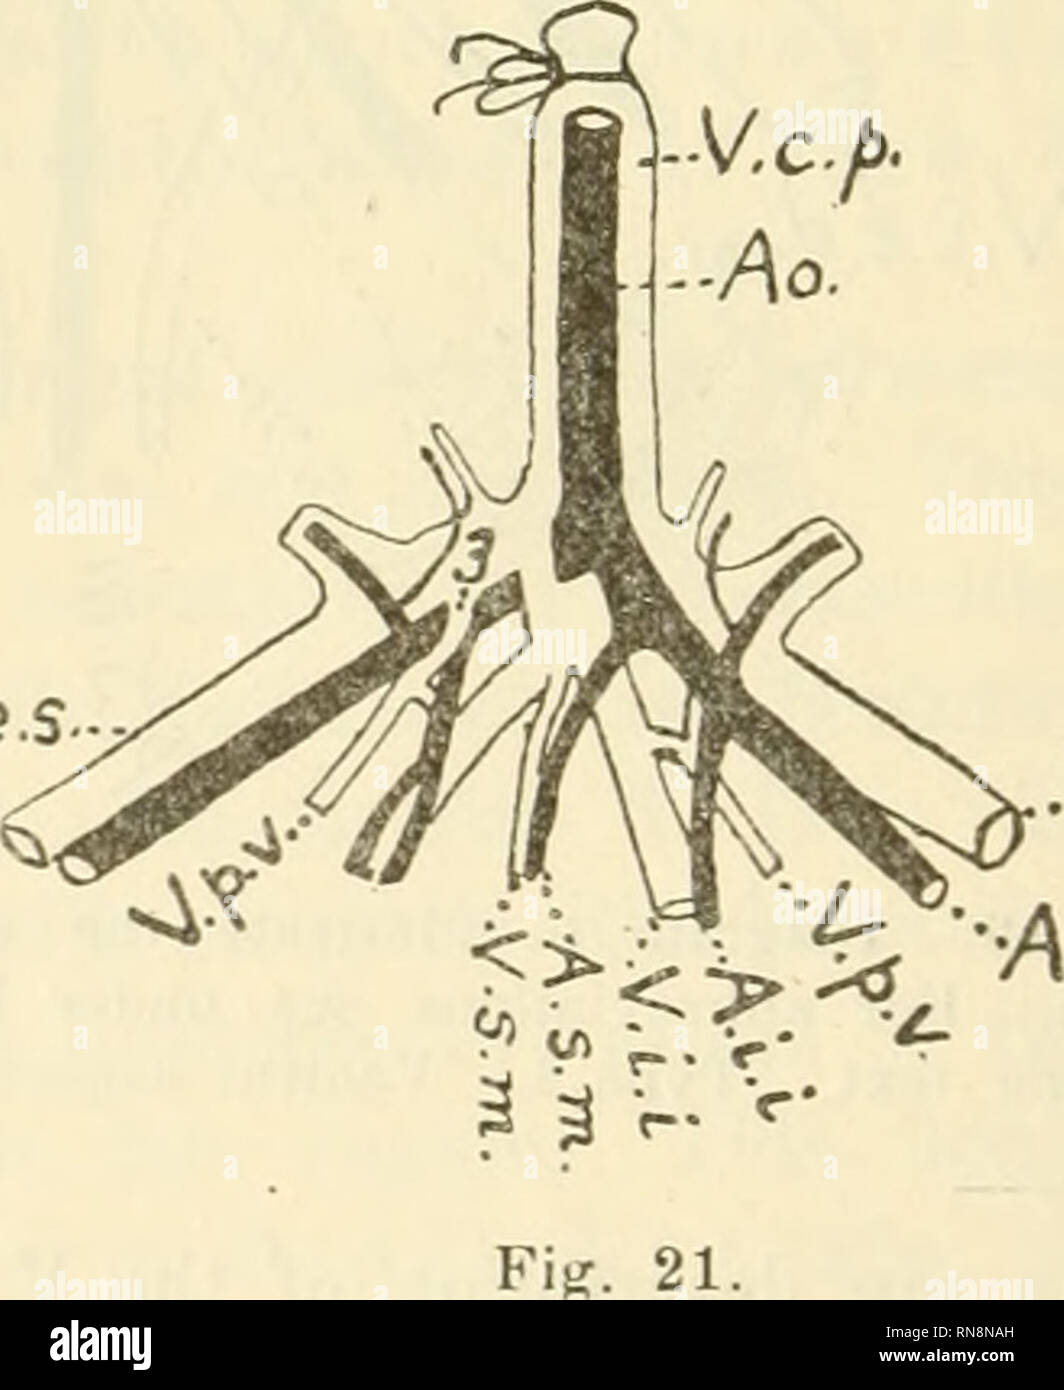 . Anatomischer Anzeiger. Anatomy, Comparative; Anatomy, Comparative. Fig. 20 The manner in which this vein is connected with the Vv. iliacae is extremely variable in Didelphys. In order to best understand these variations the following Diagram is appended. In the Diagram (Fig. 19) the V. pudendo-vesicalis (V.p.v.) is seen to open, on each side, into the angle of union of four veins. Two of these veins open into the Vv. iliacae internae, while the remaining two open into the Vv. iliacae externae. The anterior pair of these veins, numbered 1 and 2, lie ventral, and the posterior pair, numbered 3 Stock Photo